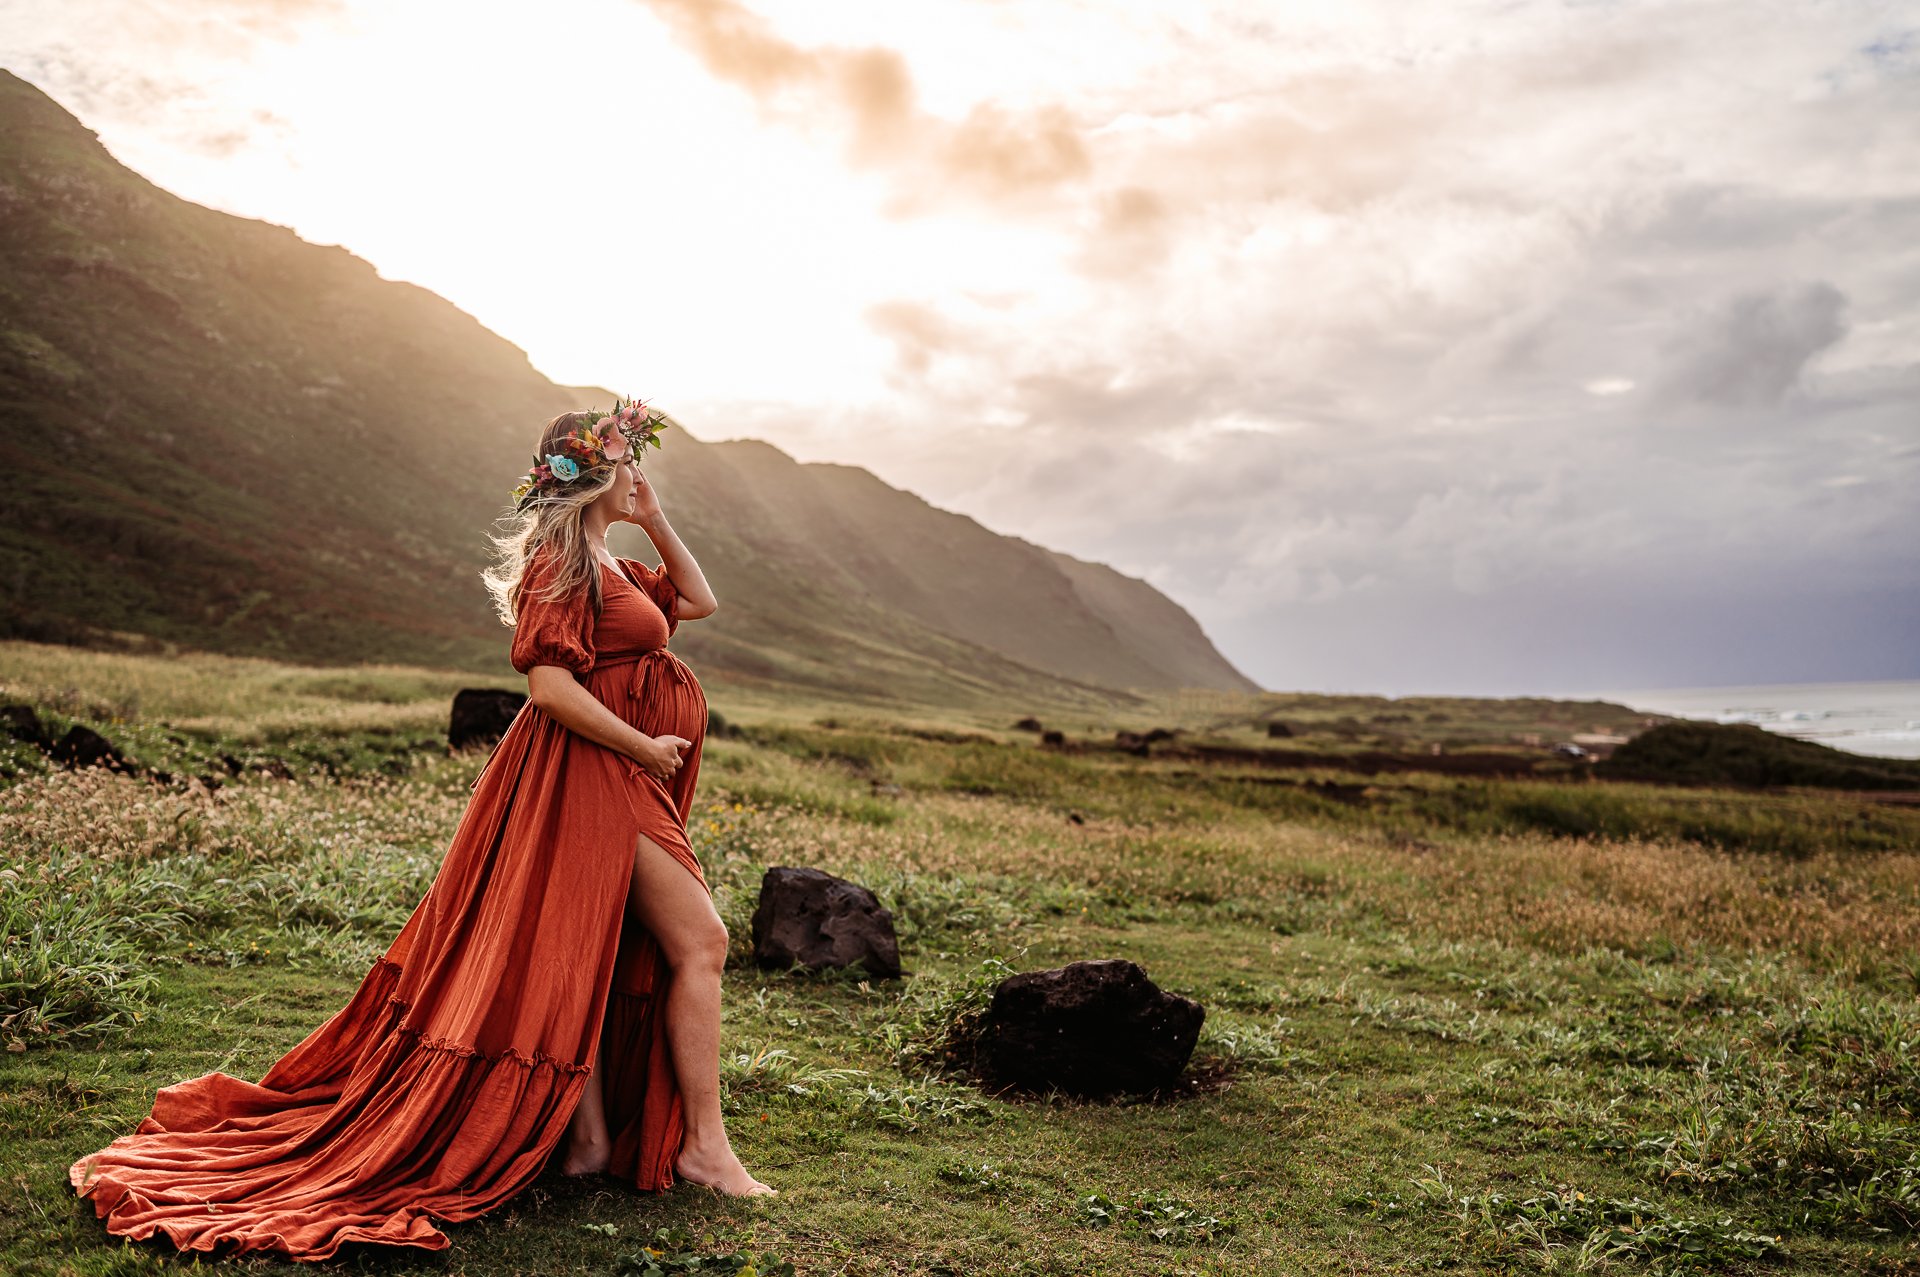 Kaena-Point-North-Shore-Oahu-Hawaii-Maternity-Session-Flower-Crown-Gown-Sarah-Elizabeth-Photos-and-film-maternity-.jpg